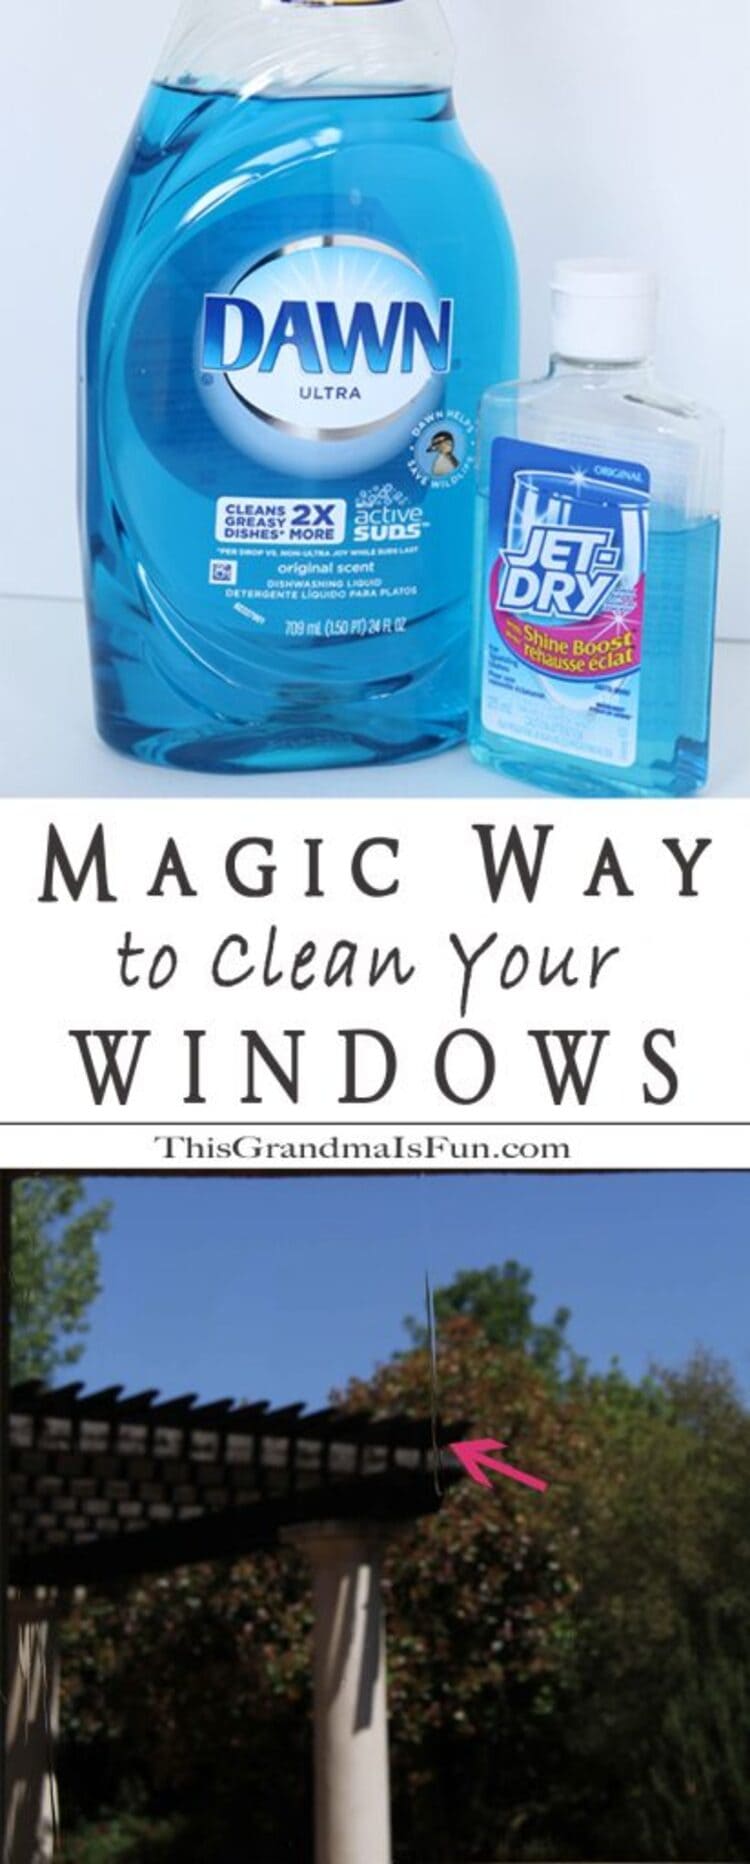 Can I Use Tap Water as Window Cleaner?